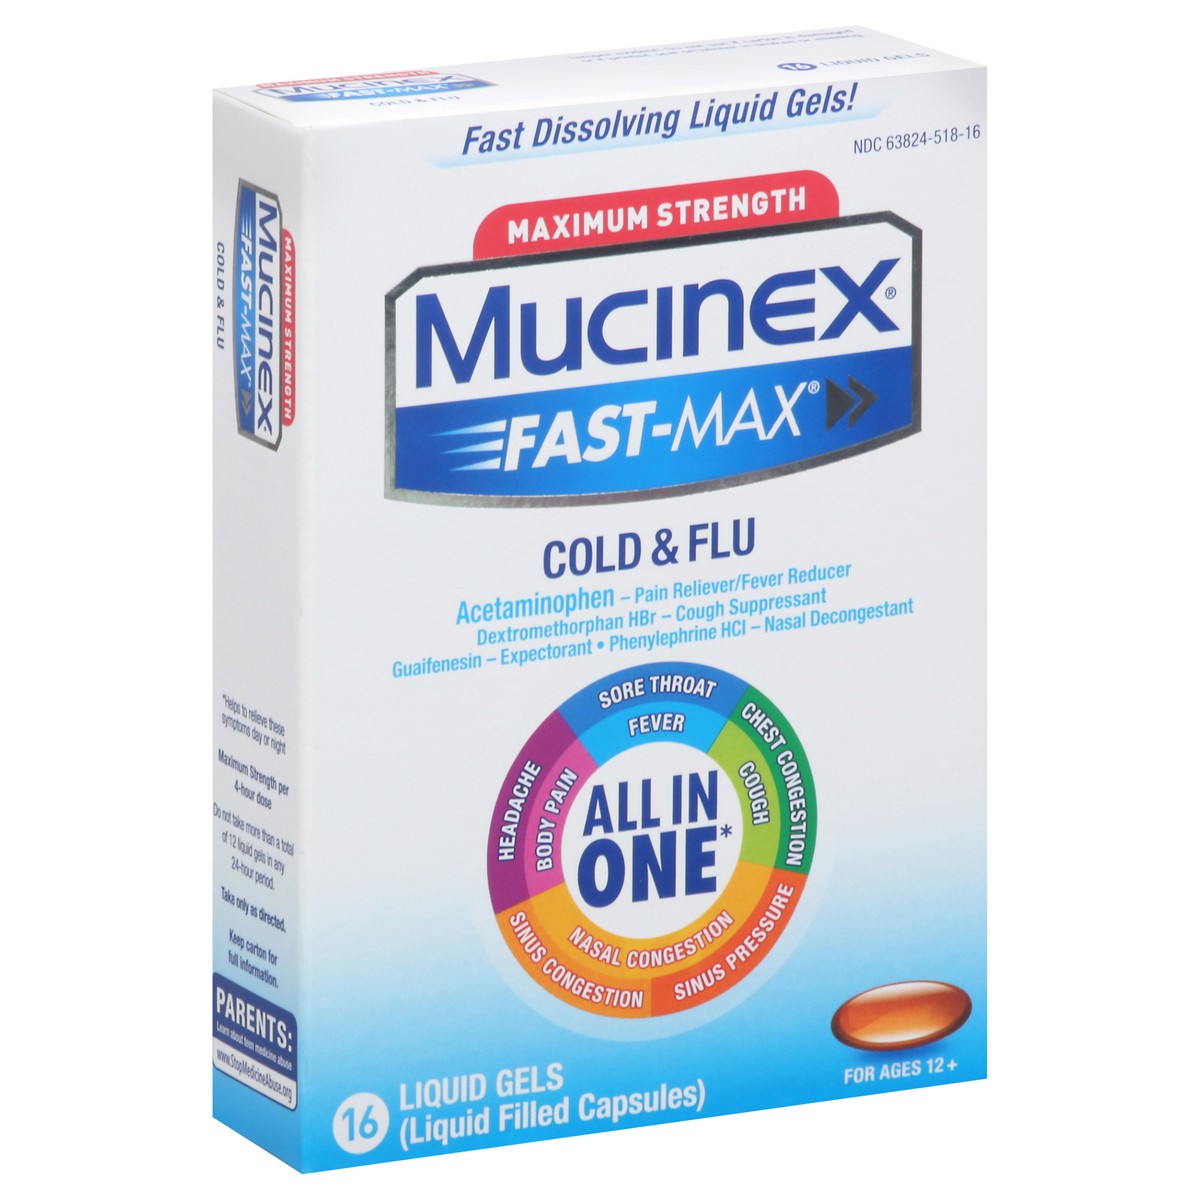 slide 9 of 9, Mucinex Maximum Strength Mucinex Fast-Max Cold & Flu All-In-One Liquid Gels, 16ct (Packaging May Vary), 16 oz